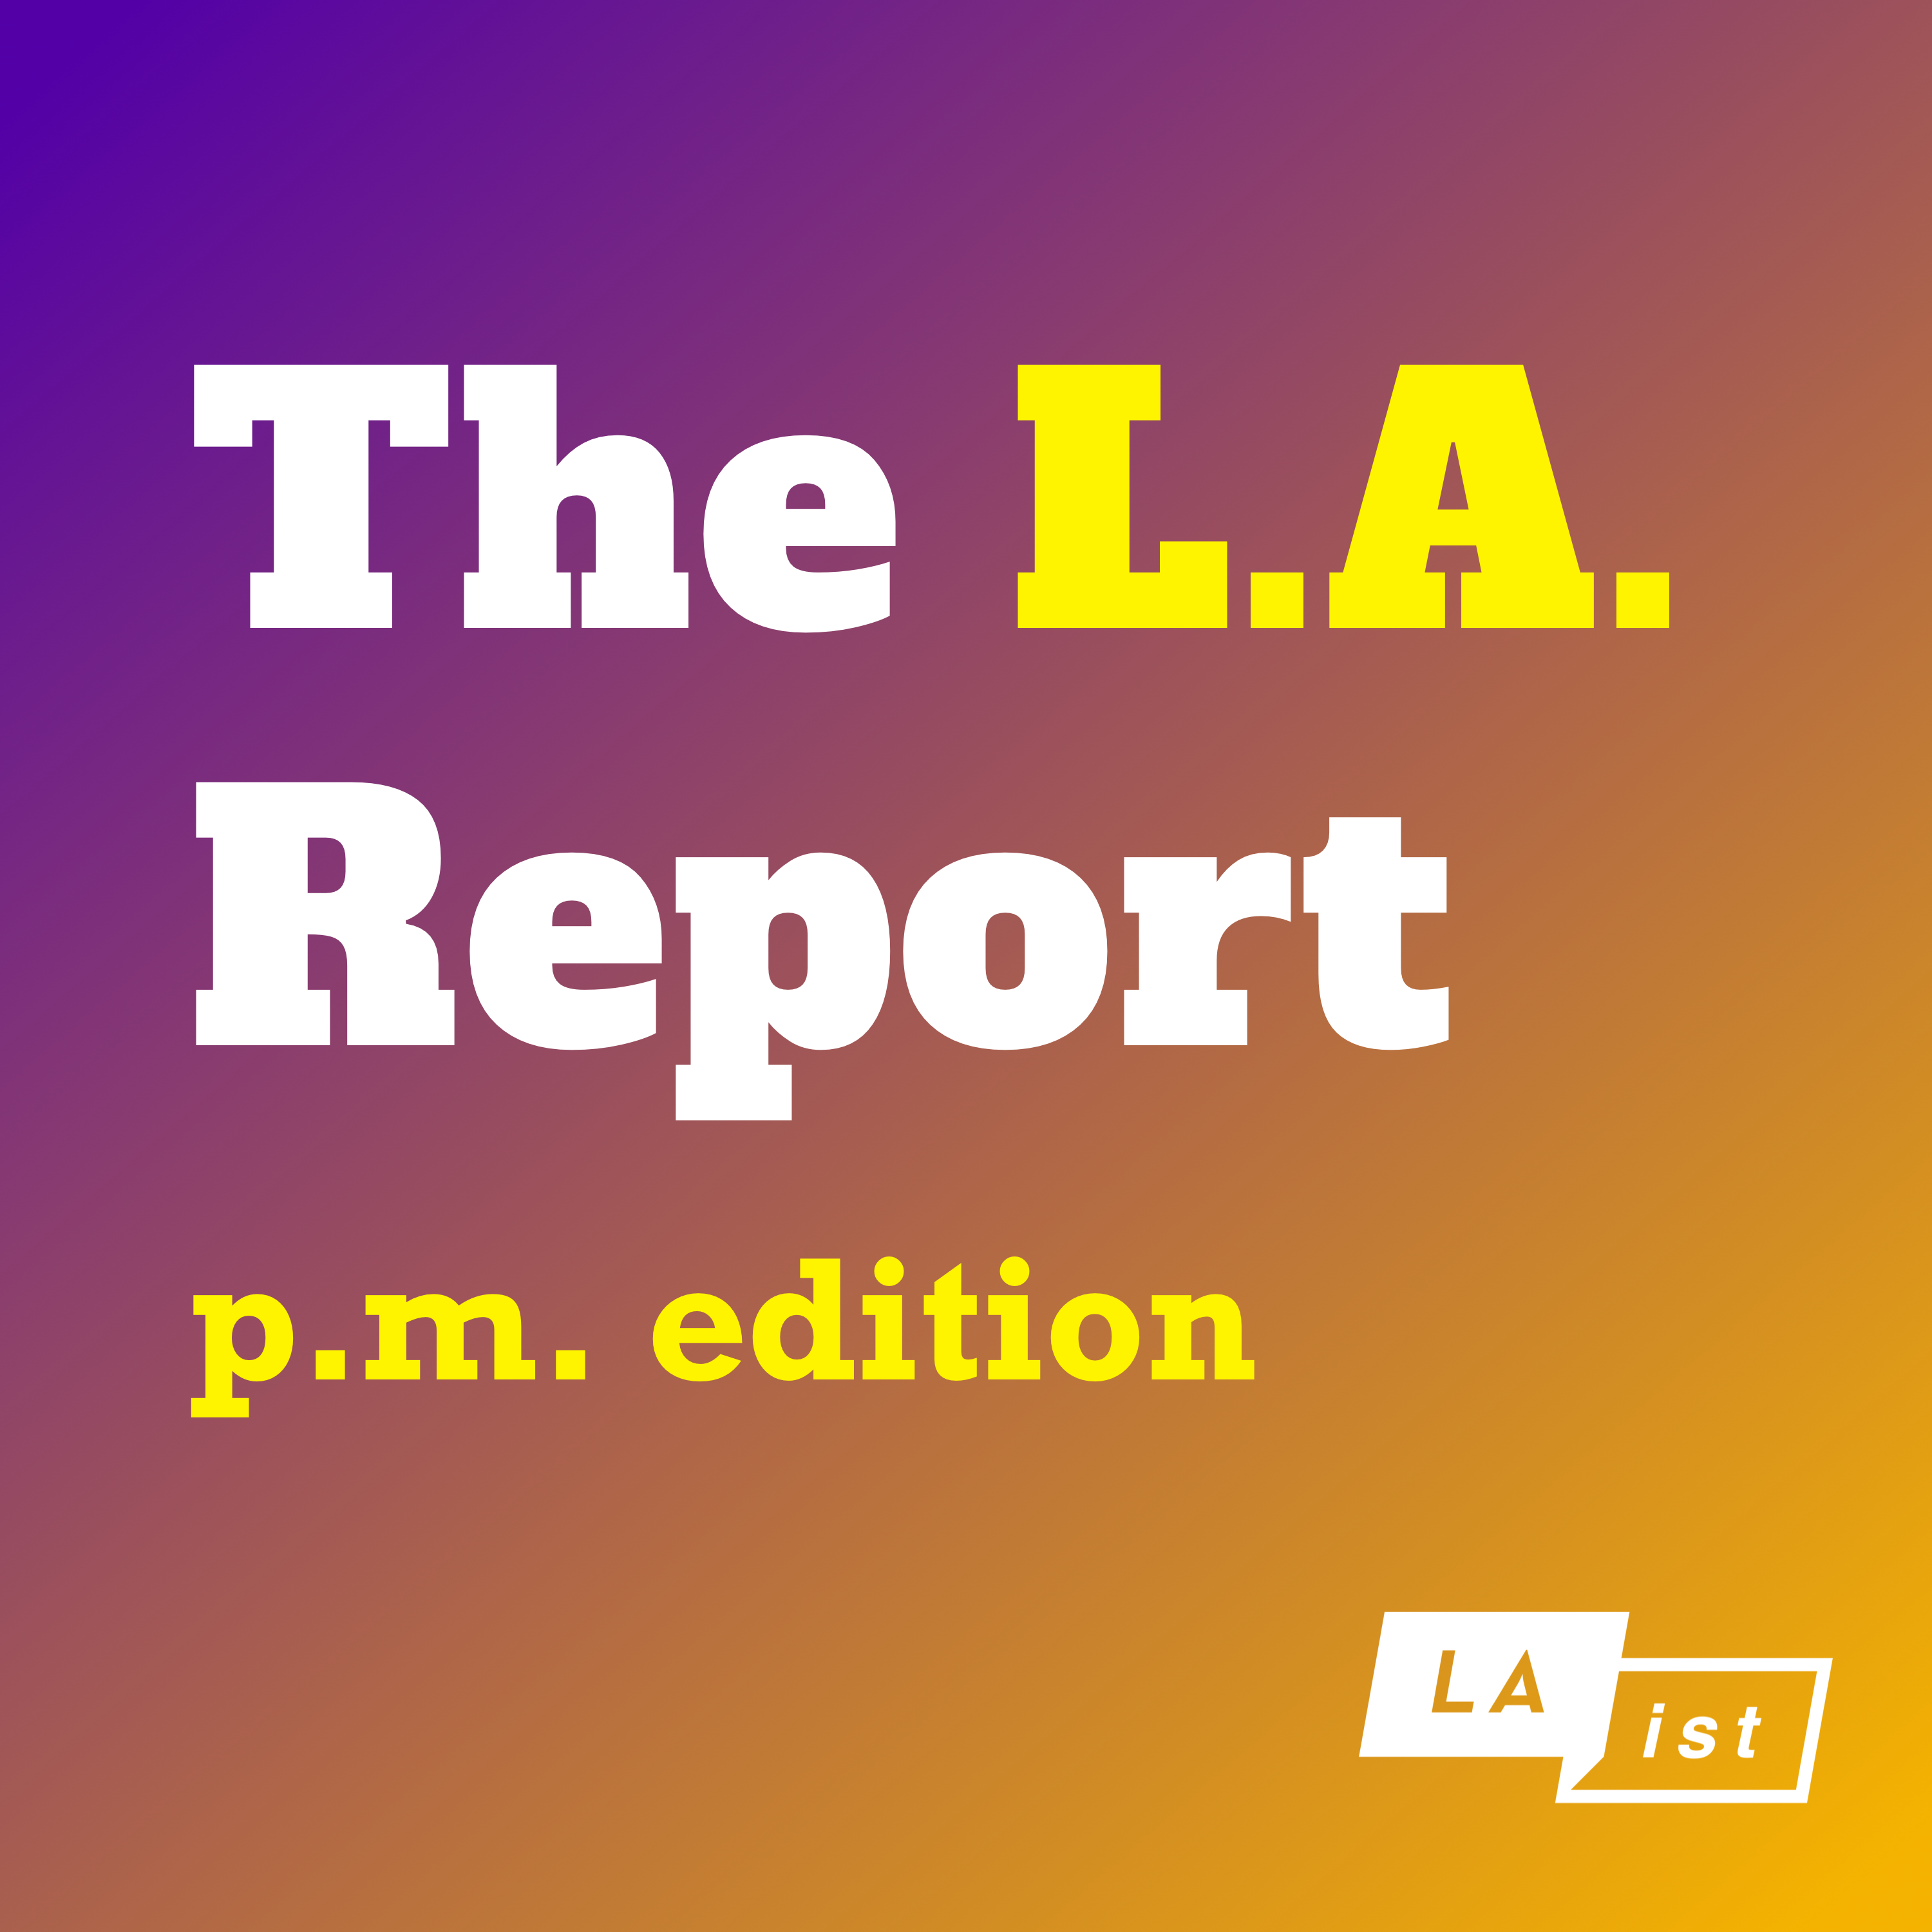 LA Ballot Initiative Wants to Raise Taxes To Fund Homeless Services, UC Orders Probe Into Protest Response At UCLA, LA Sparks Season Opener — The P. M. Edition